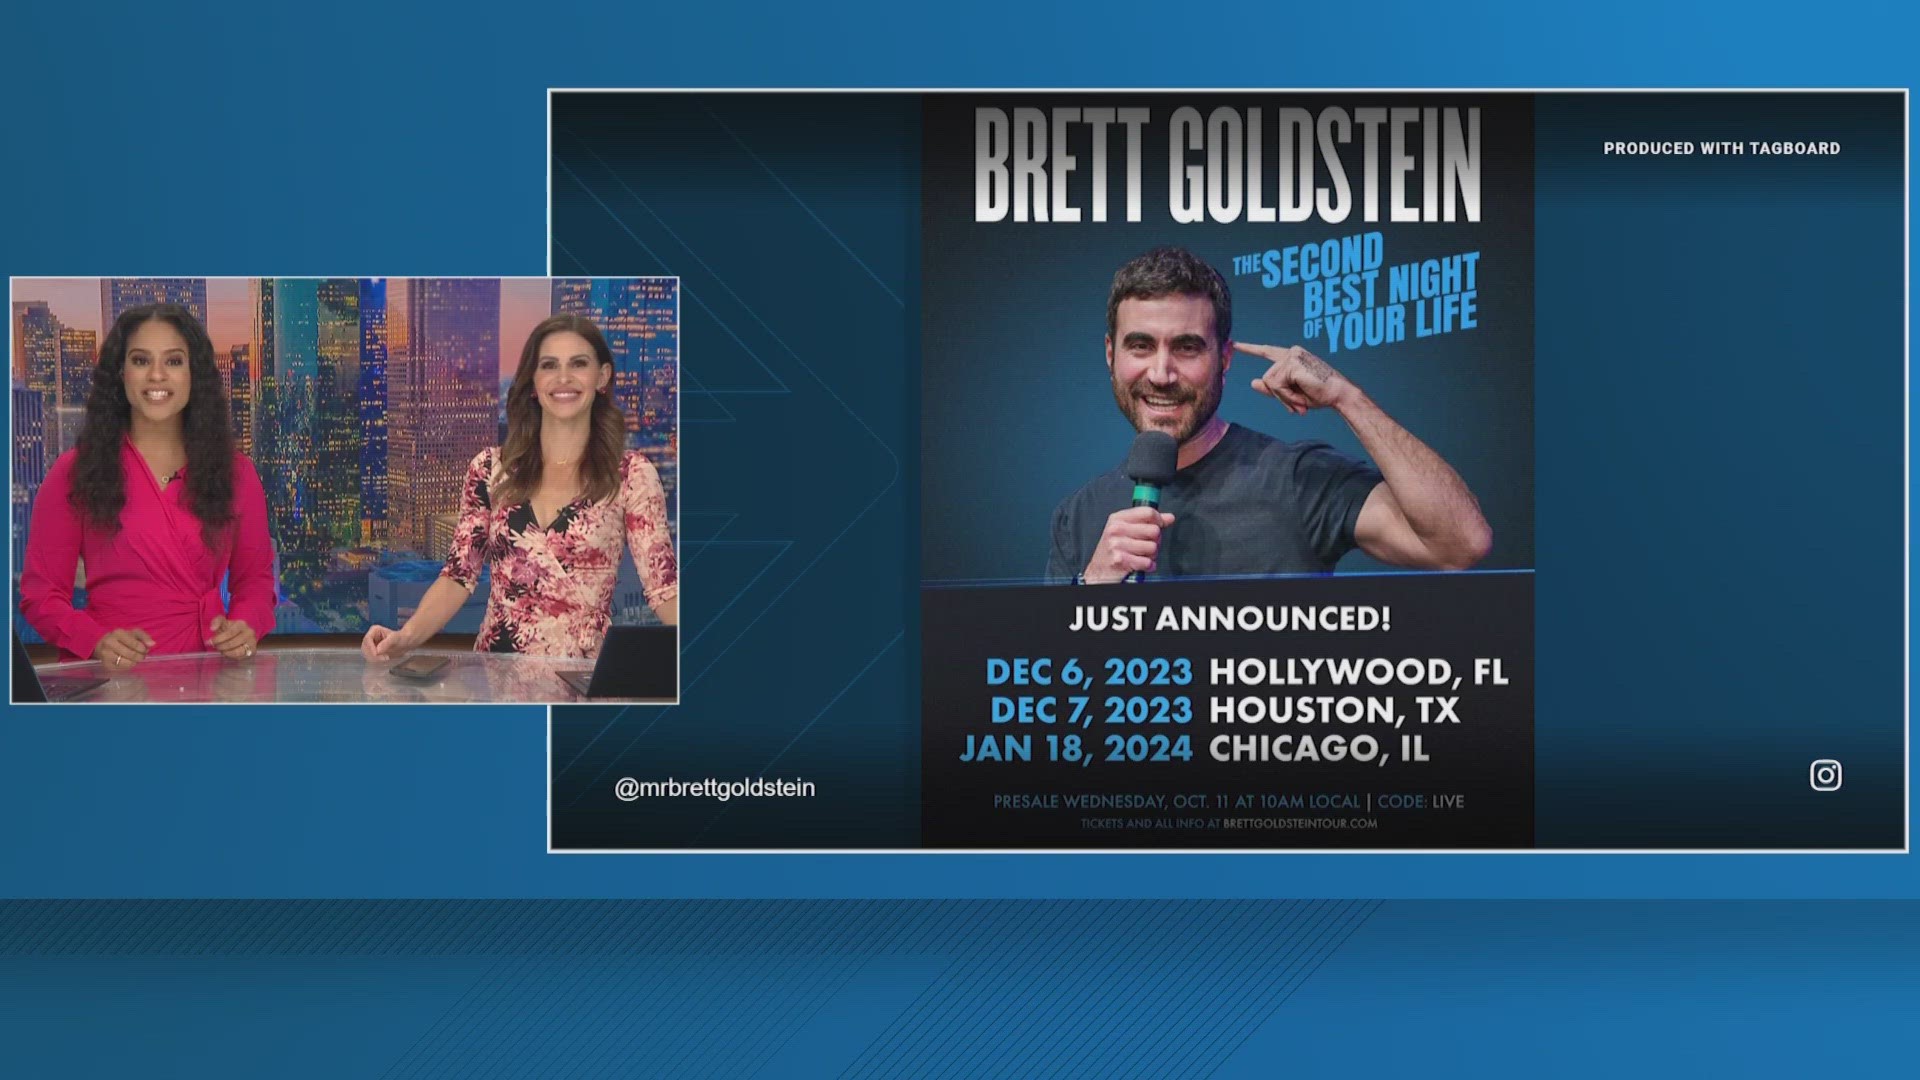 Brett Goldstein, known for his role as Roy Kent in the “Ted Lasso” series on Apple TV+ will be bringing his comedy tour to Houston.